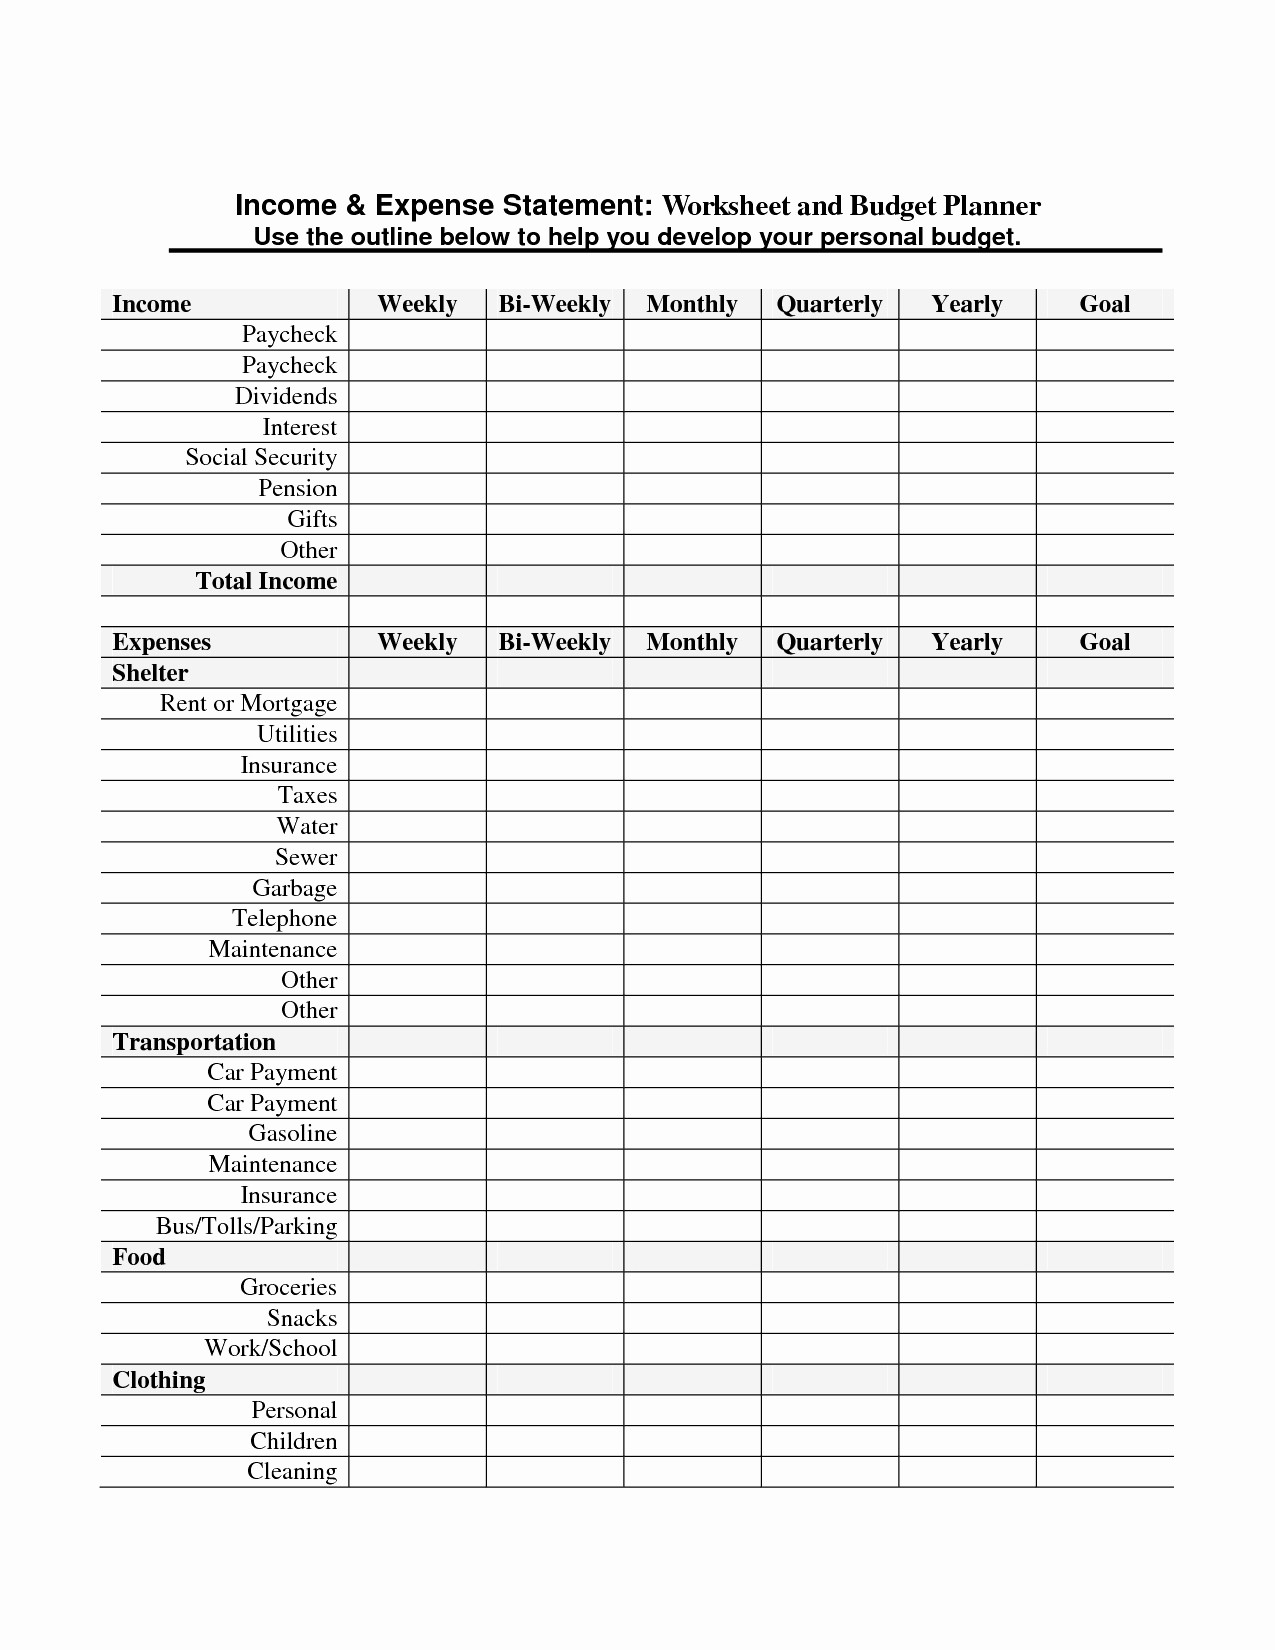 Schedule C Car And Truck Expenses Worksheet Awesome Driver Tax Document Deduction For